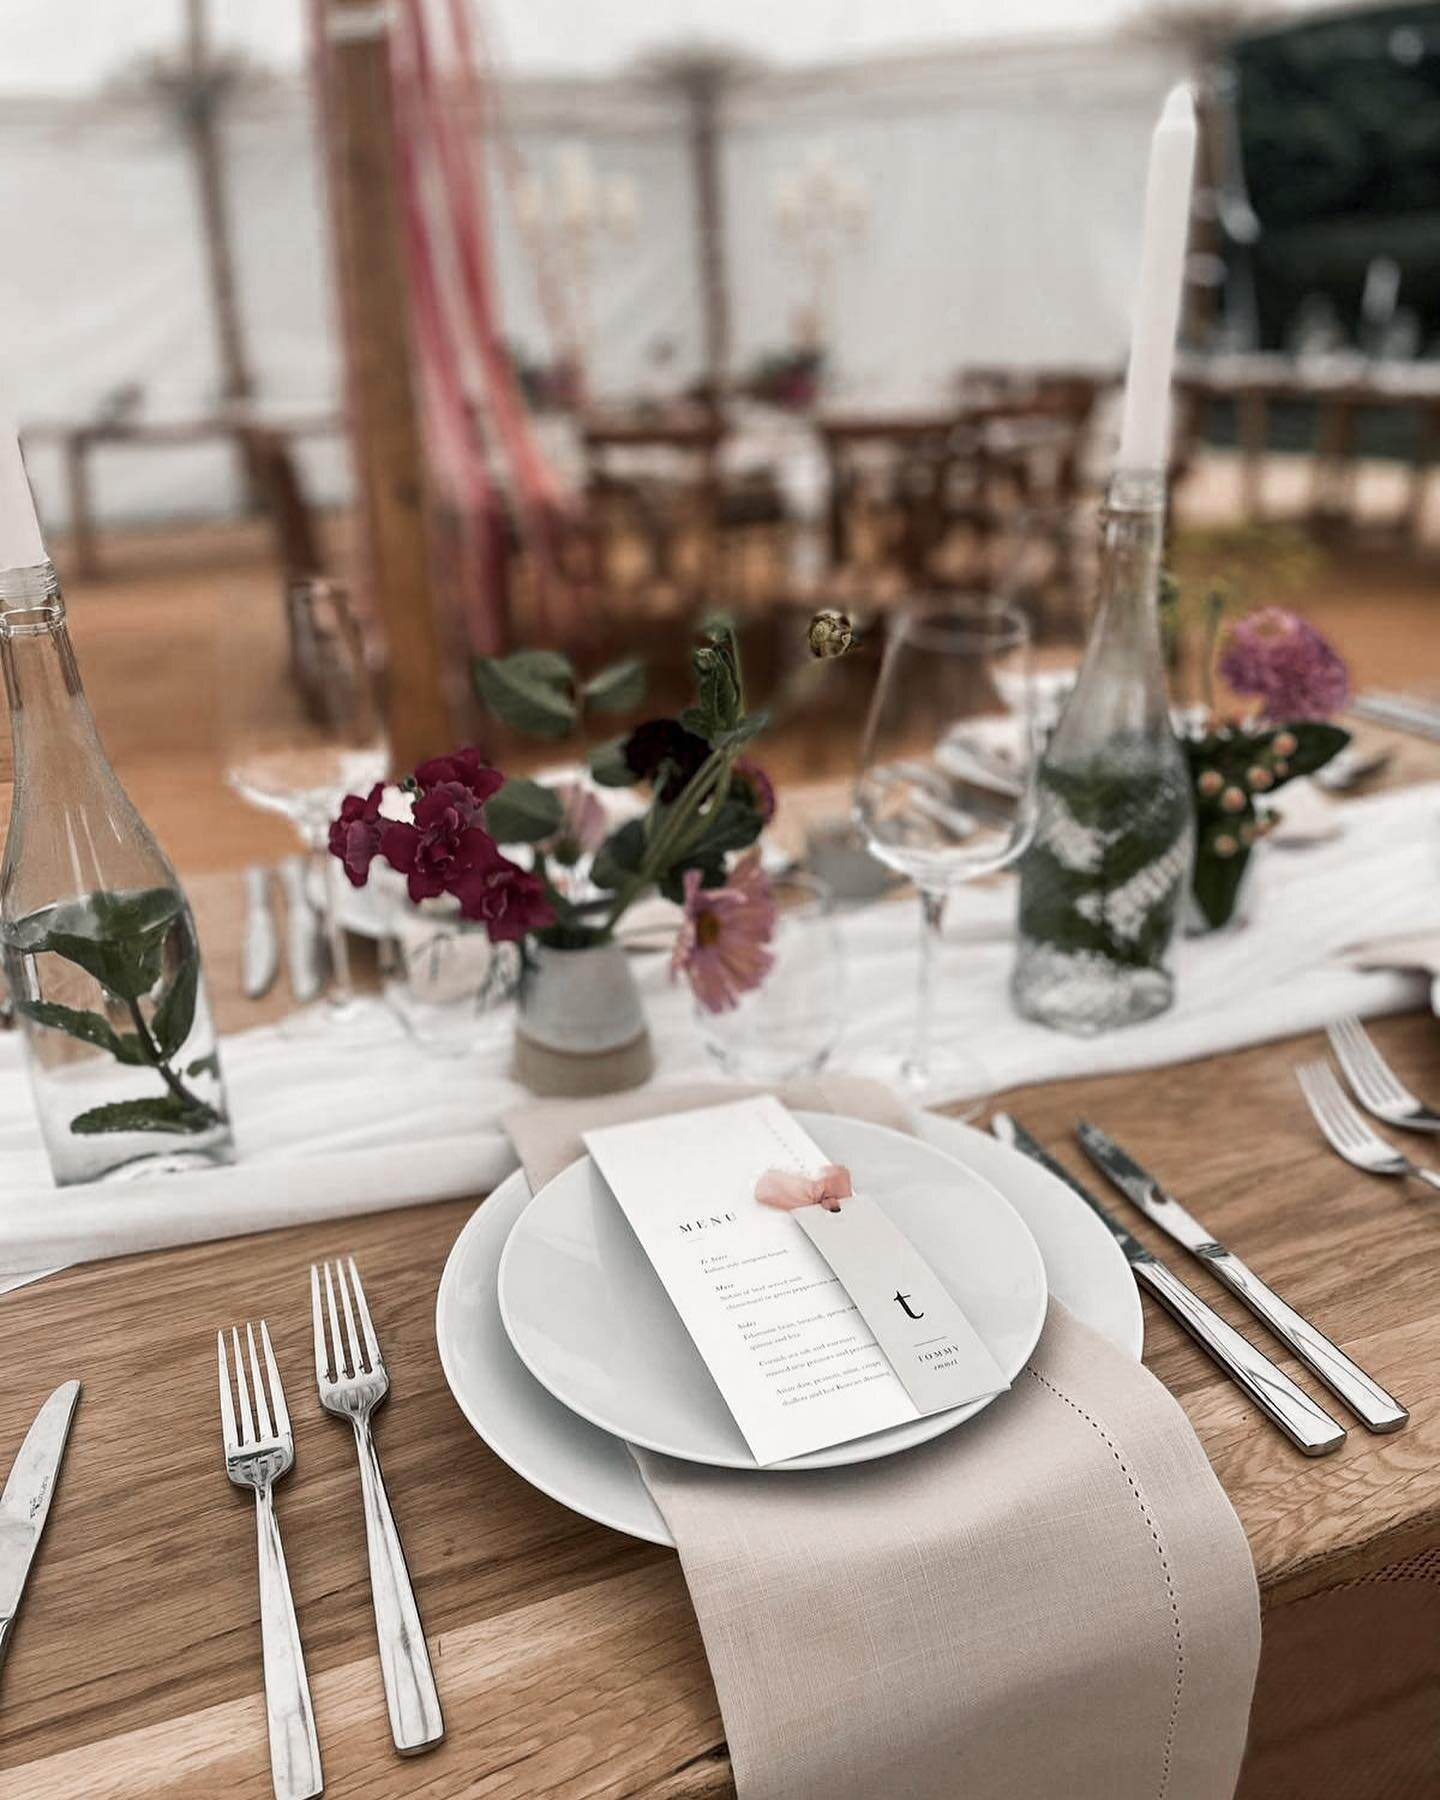 Menus are an important detail of a table setting, it can be stylish or rustic depends of your wedding style. Pretty paper or a stained wood sign with a gorgeous hand writing.

Pic 1 &amp; 3 @natspaperstudio 
Pic 2 &amp; 4 @lucca_studios 
.
.
.
.
#wed